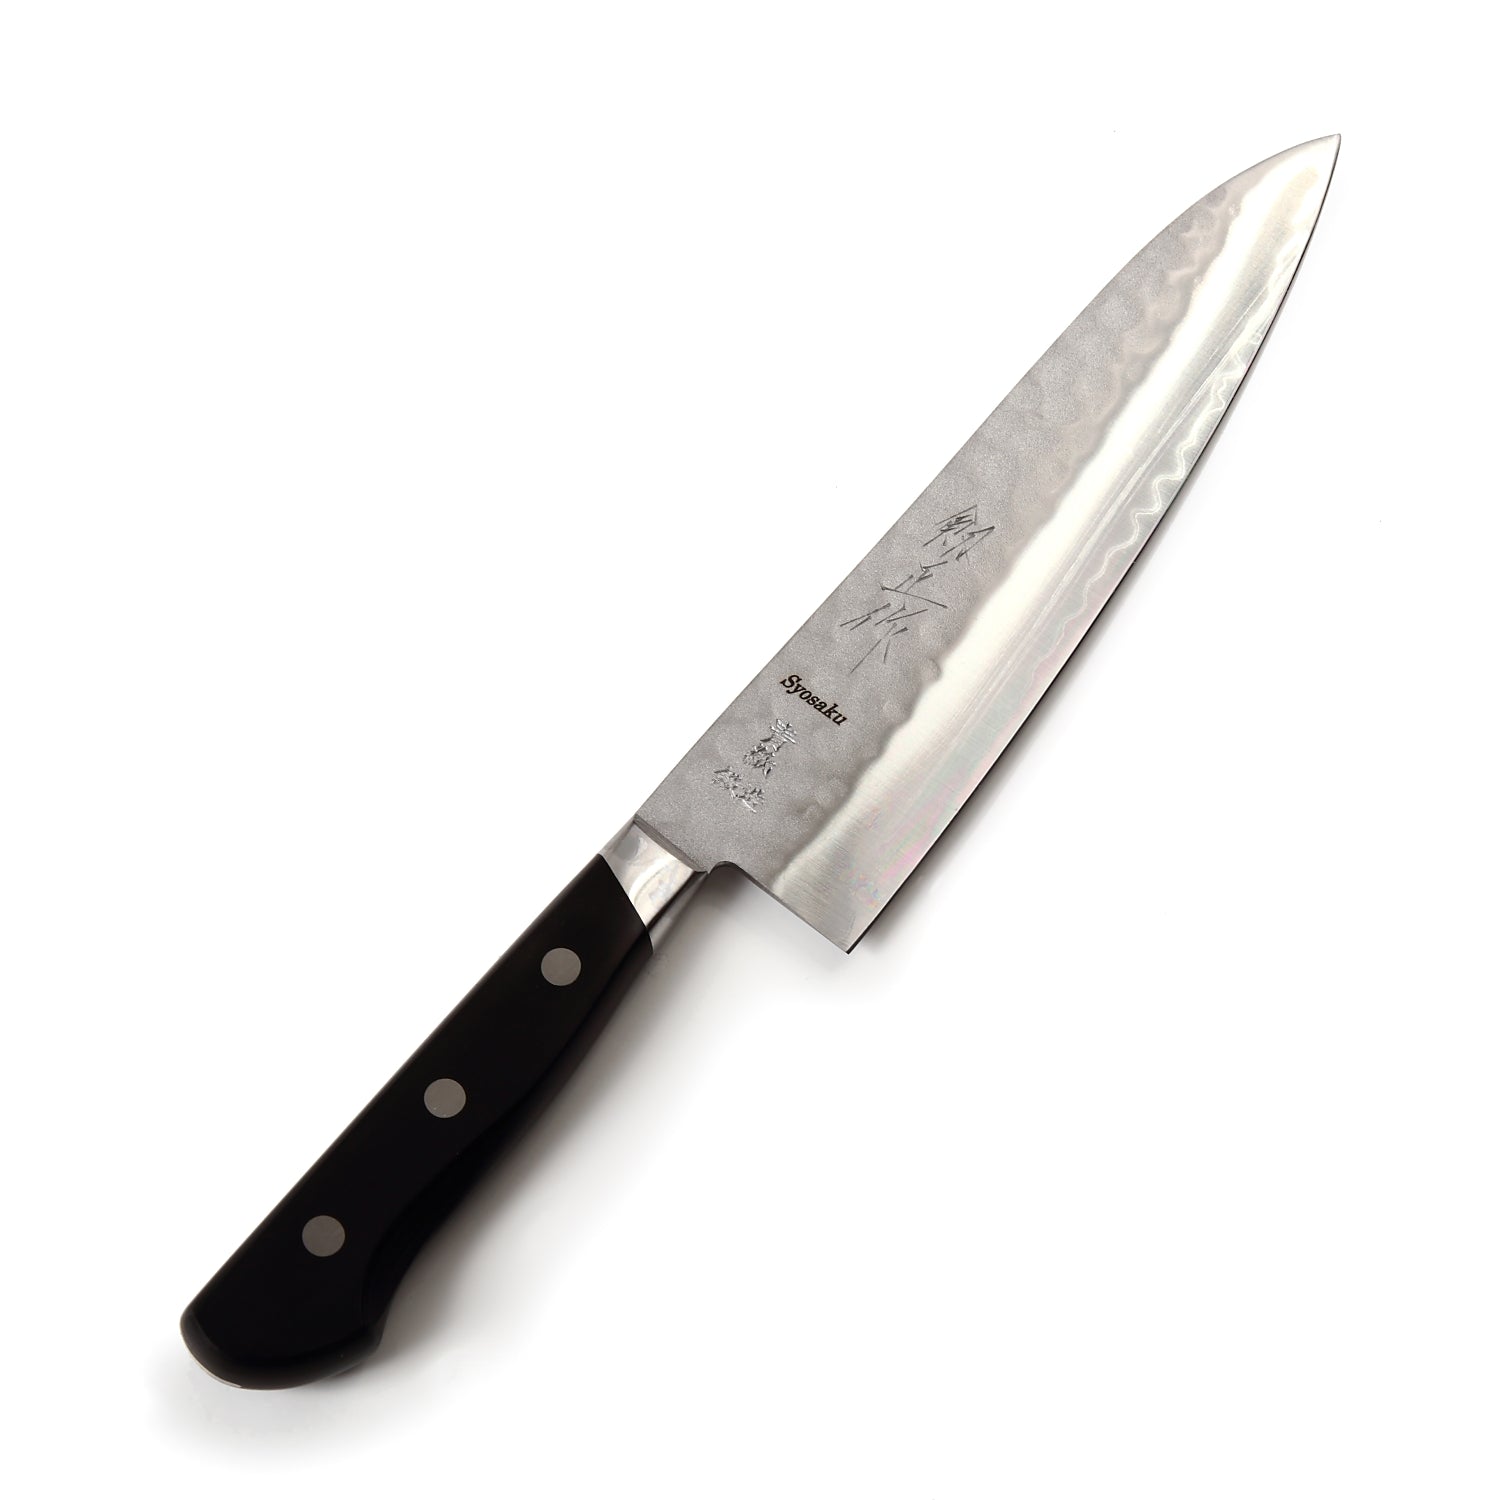 Professional Chef Knife 8 inch Gyutou Japanese Damascus Steel High Quality